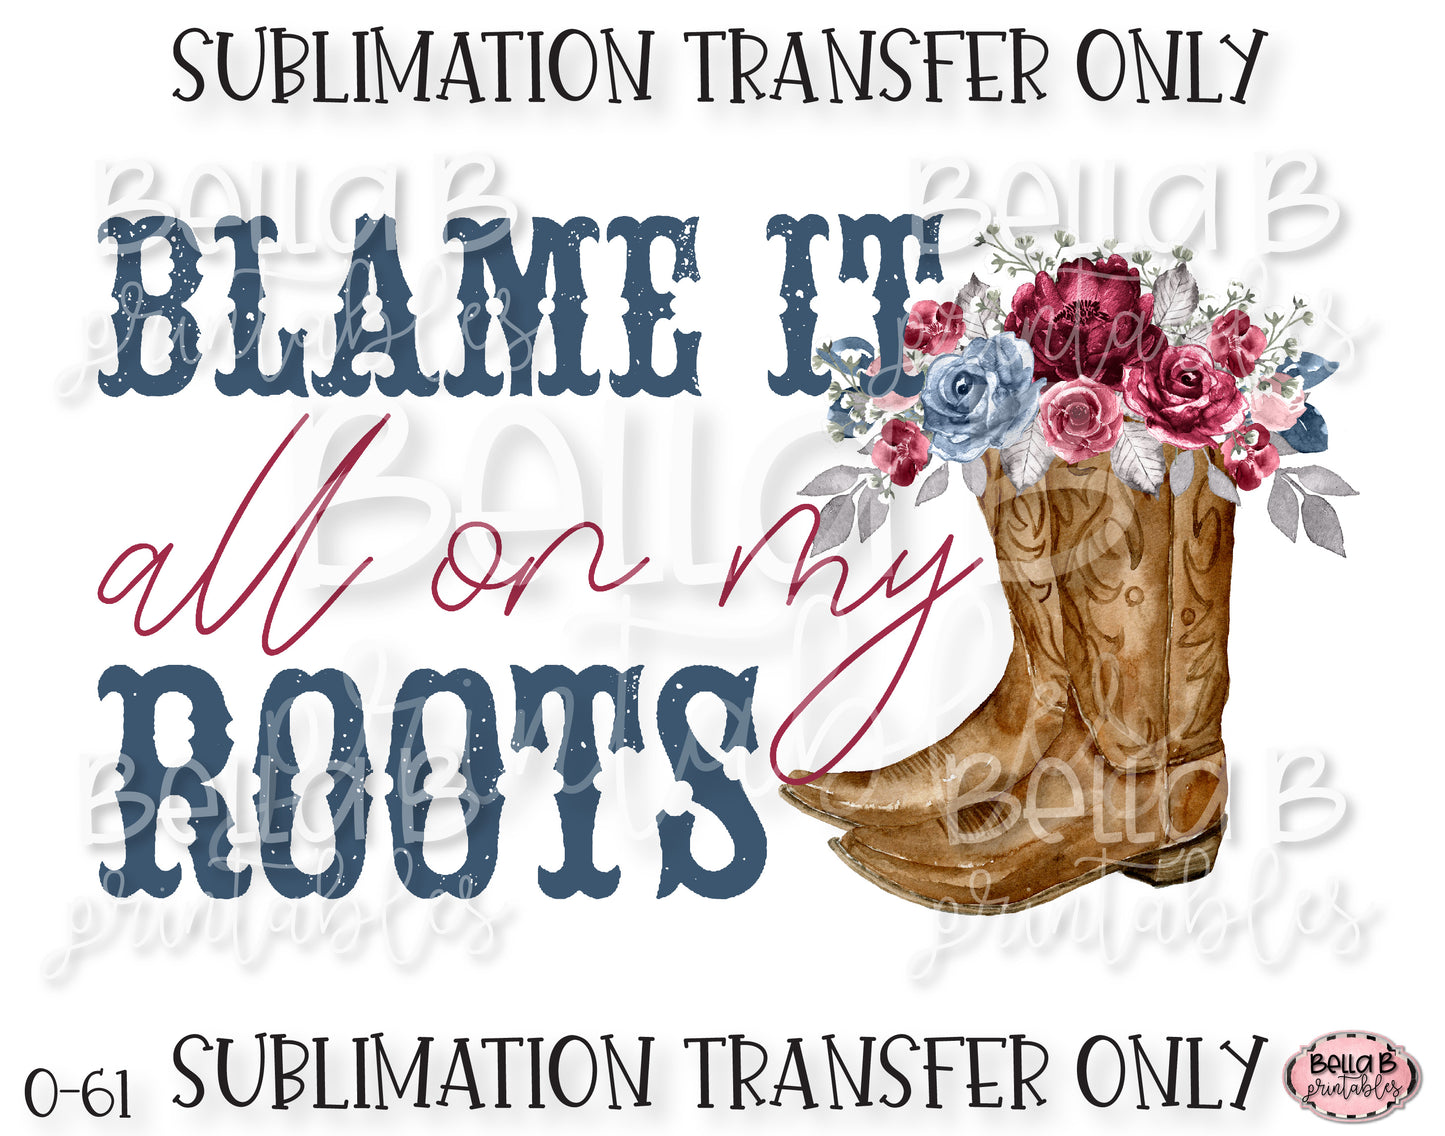 Blame It All On My Roots Sublimation Transfer, Ready To Press, Heat Press Transfer, Sublimation Print